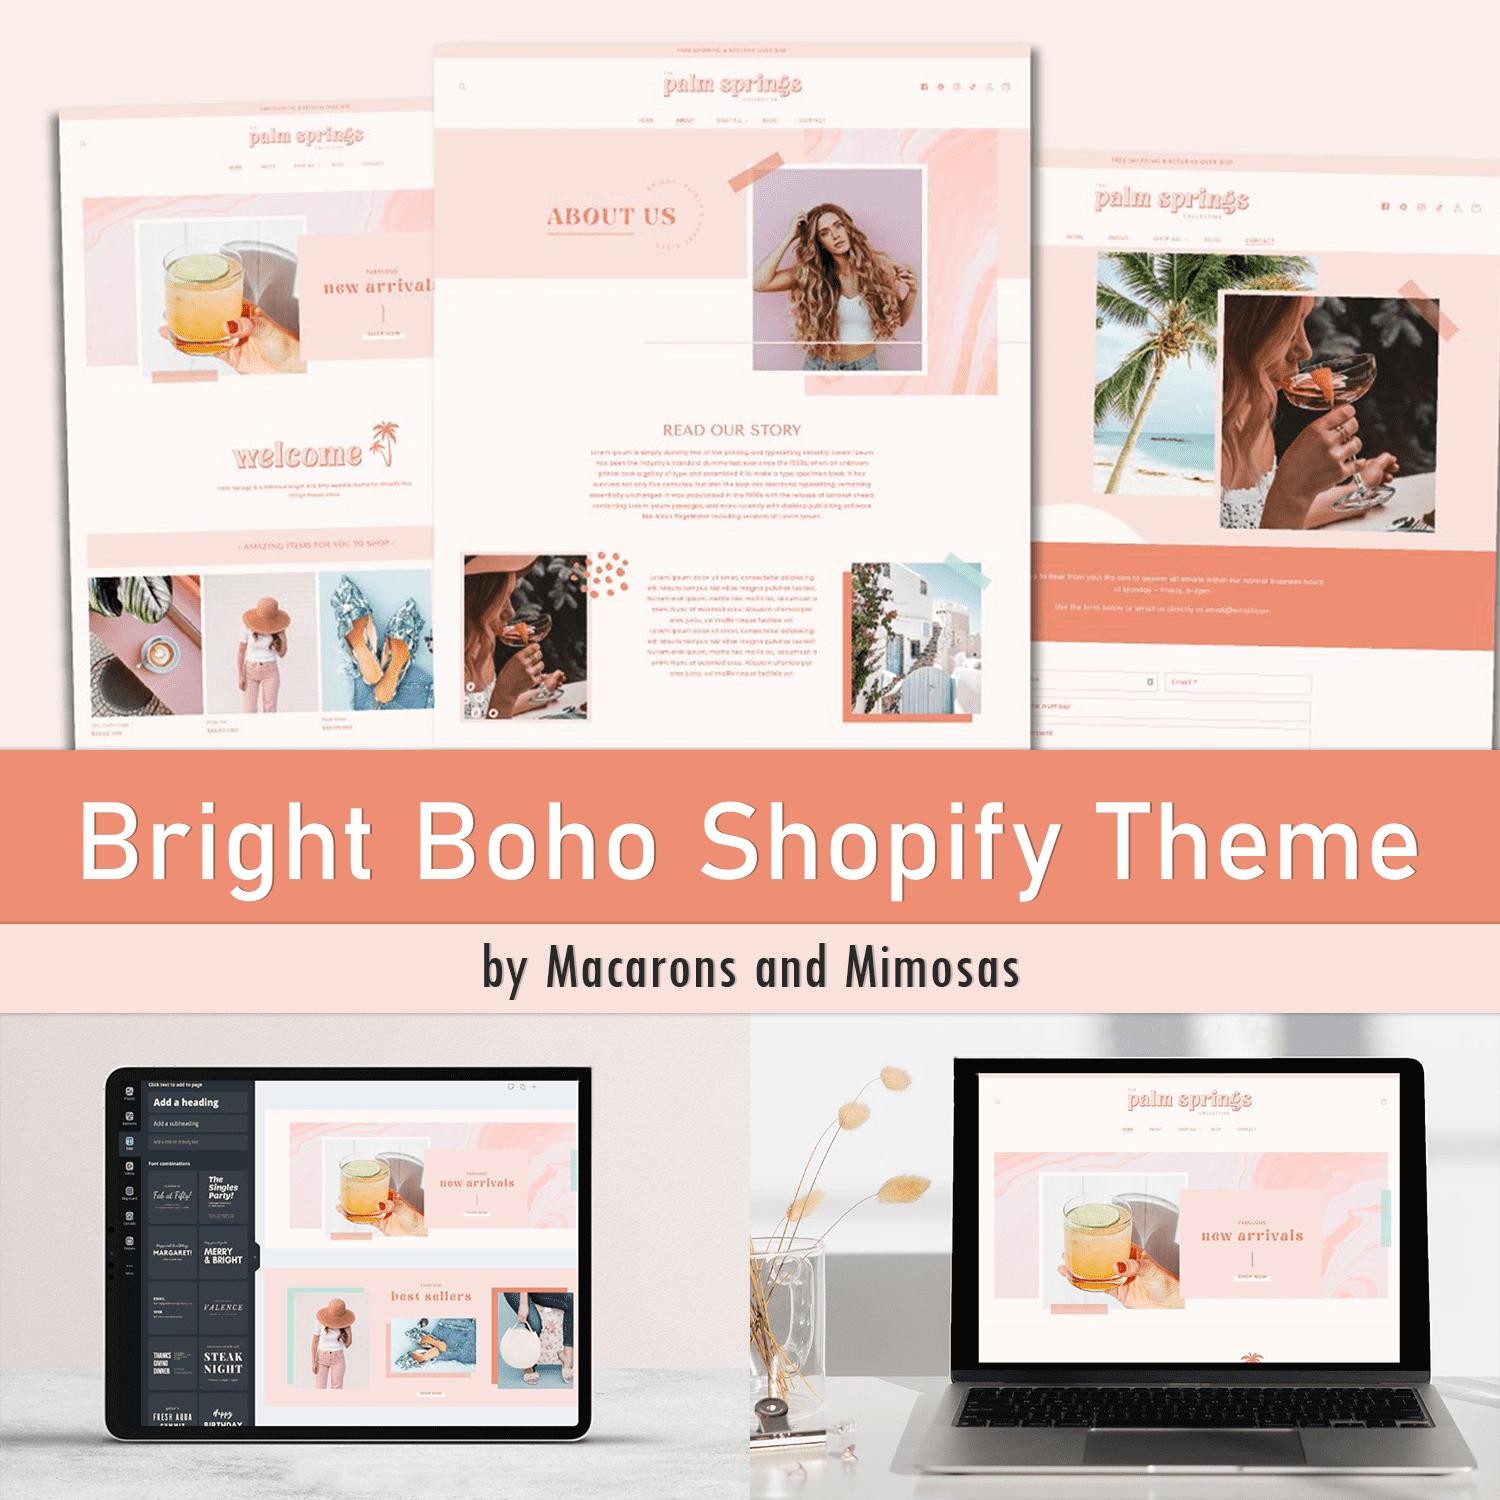 Set of images of colorful Shopify theme pages.